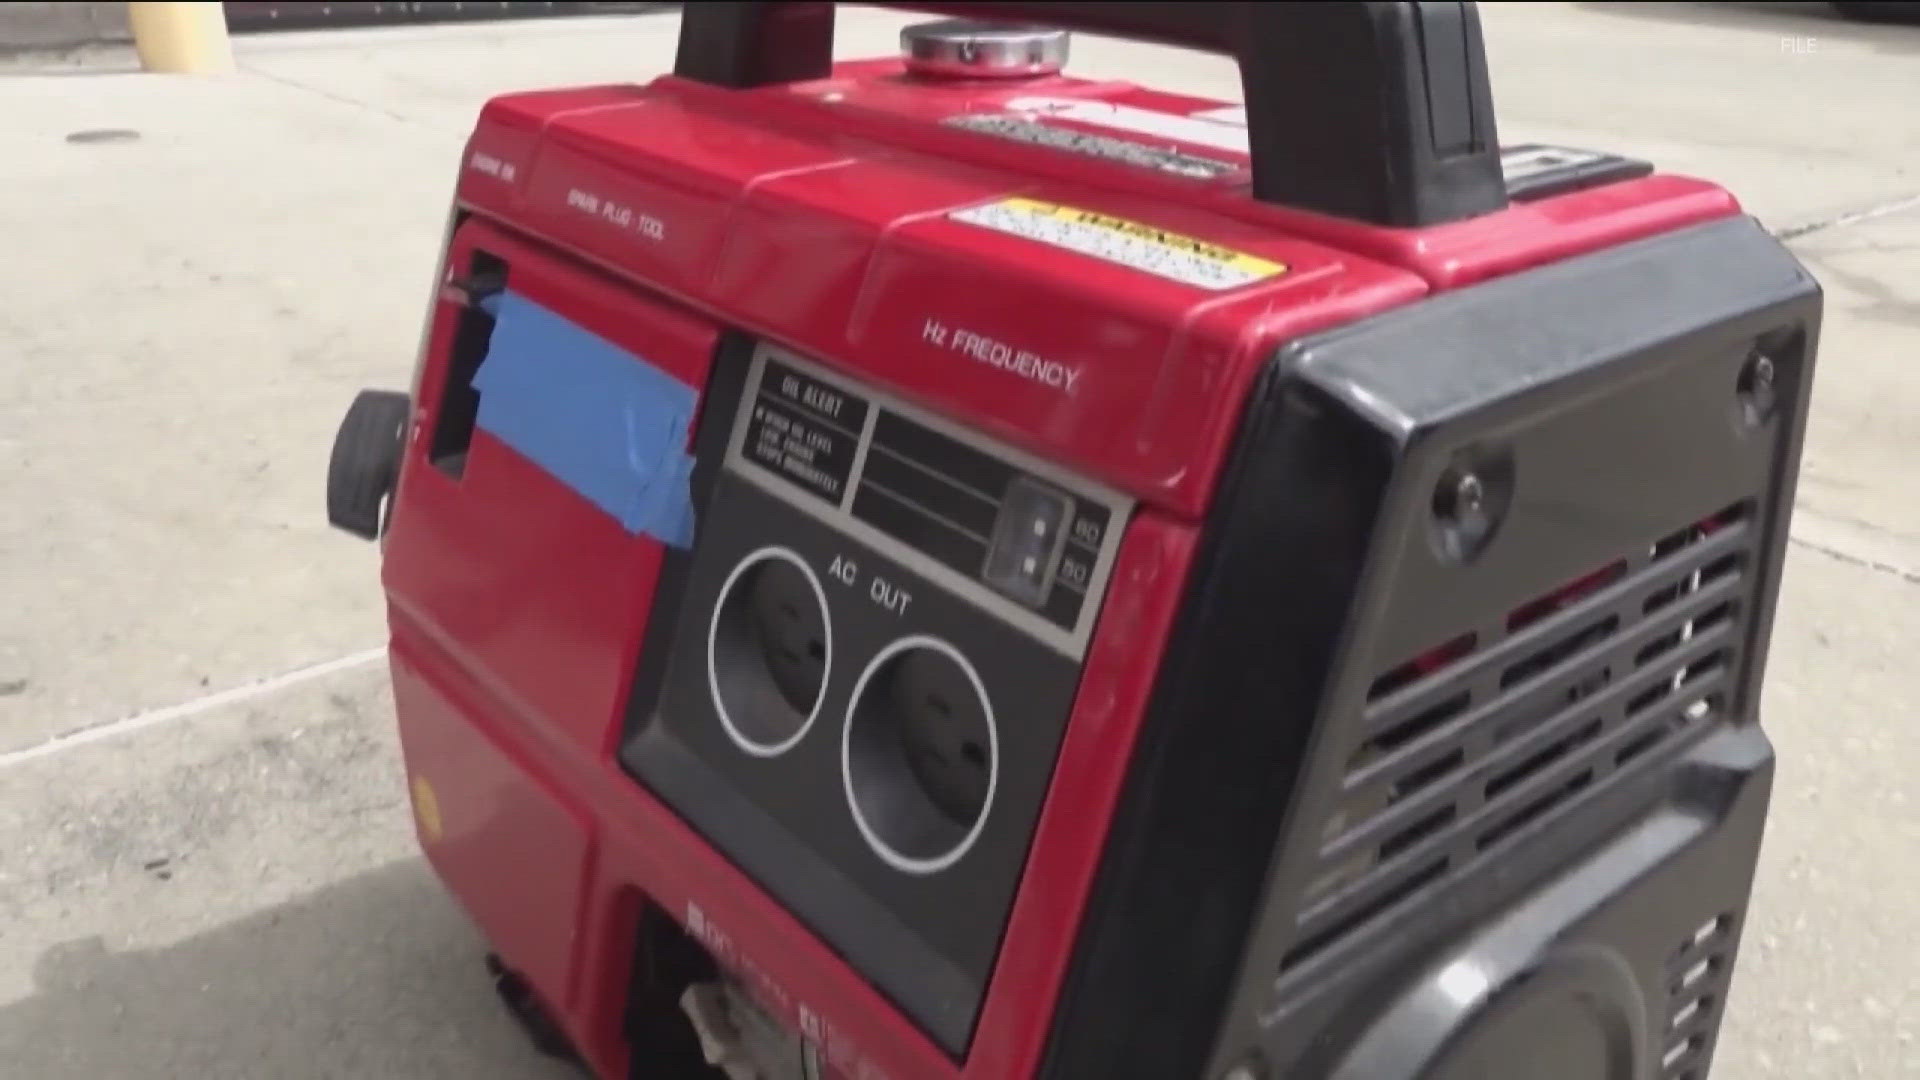 A proposed federal rule would regulate portable gas-powered generators’ carbon monoxide safety systems. An industry group says that could cause a temporary shortage.